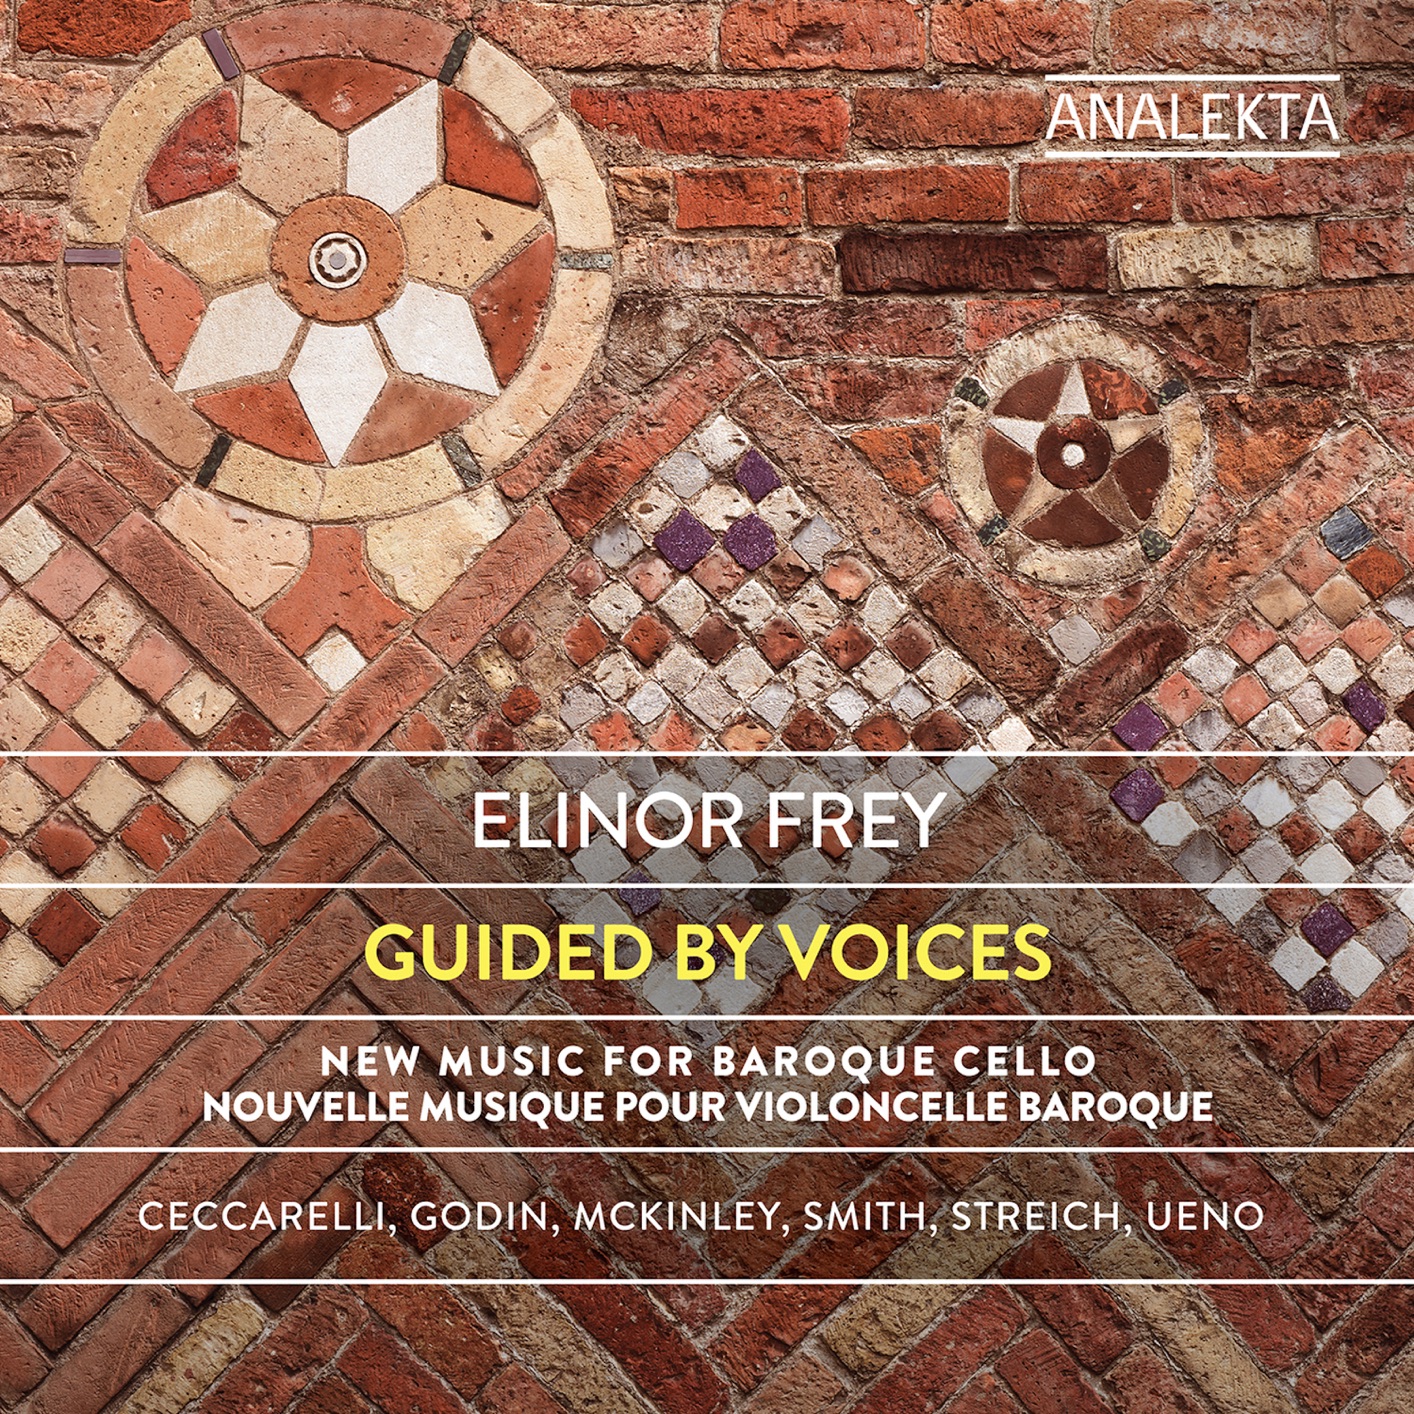 Elinor Frey – Guided by Voices: New Music for Baroque Cello (2019) [FLAC 24bit/88,2kHz]